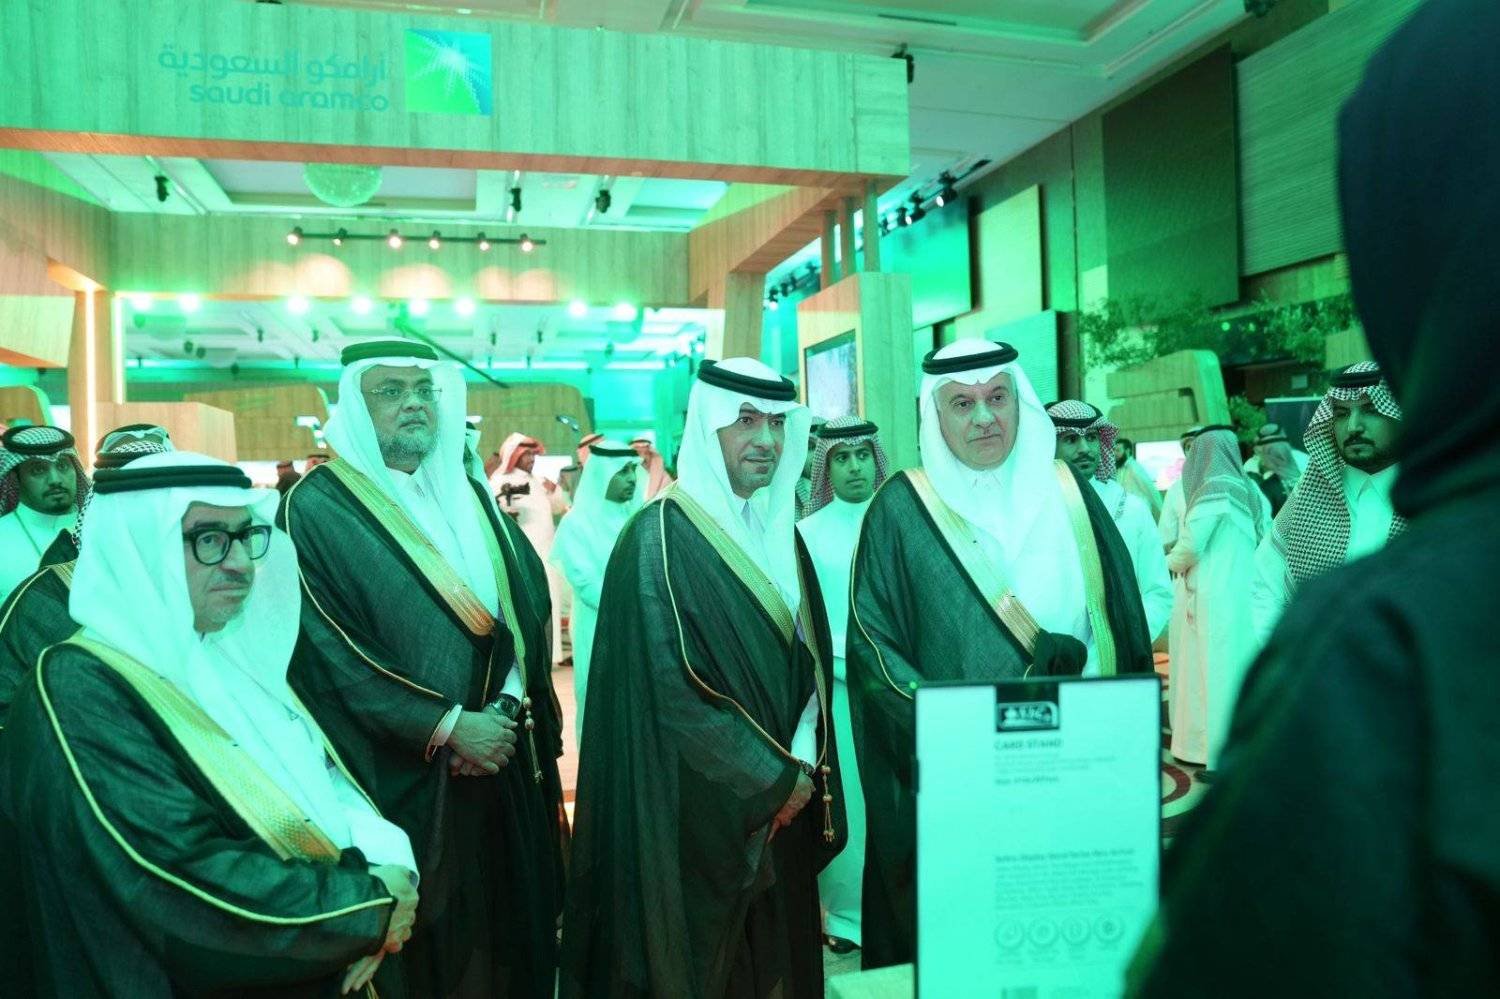 Part of the sponsorship of the National Greening Forum was provided by several Saudi ministers (Asharq Al-Awsat)